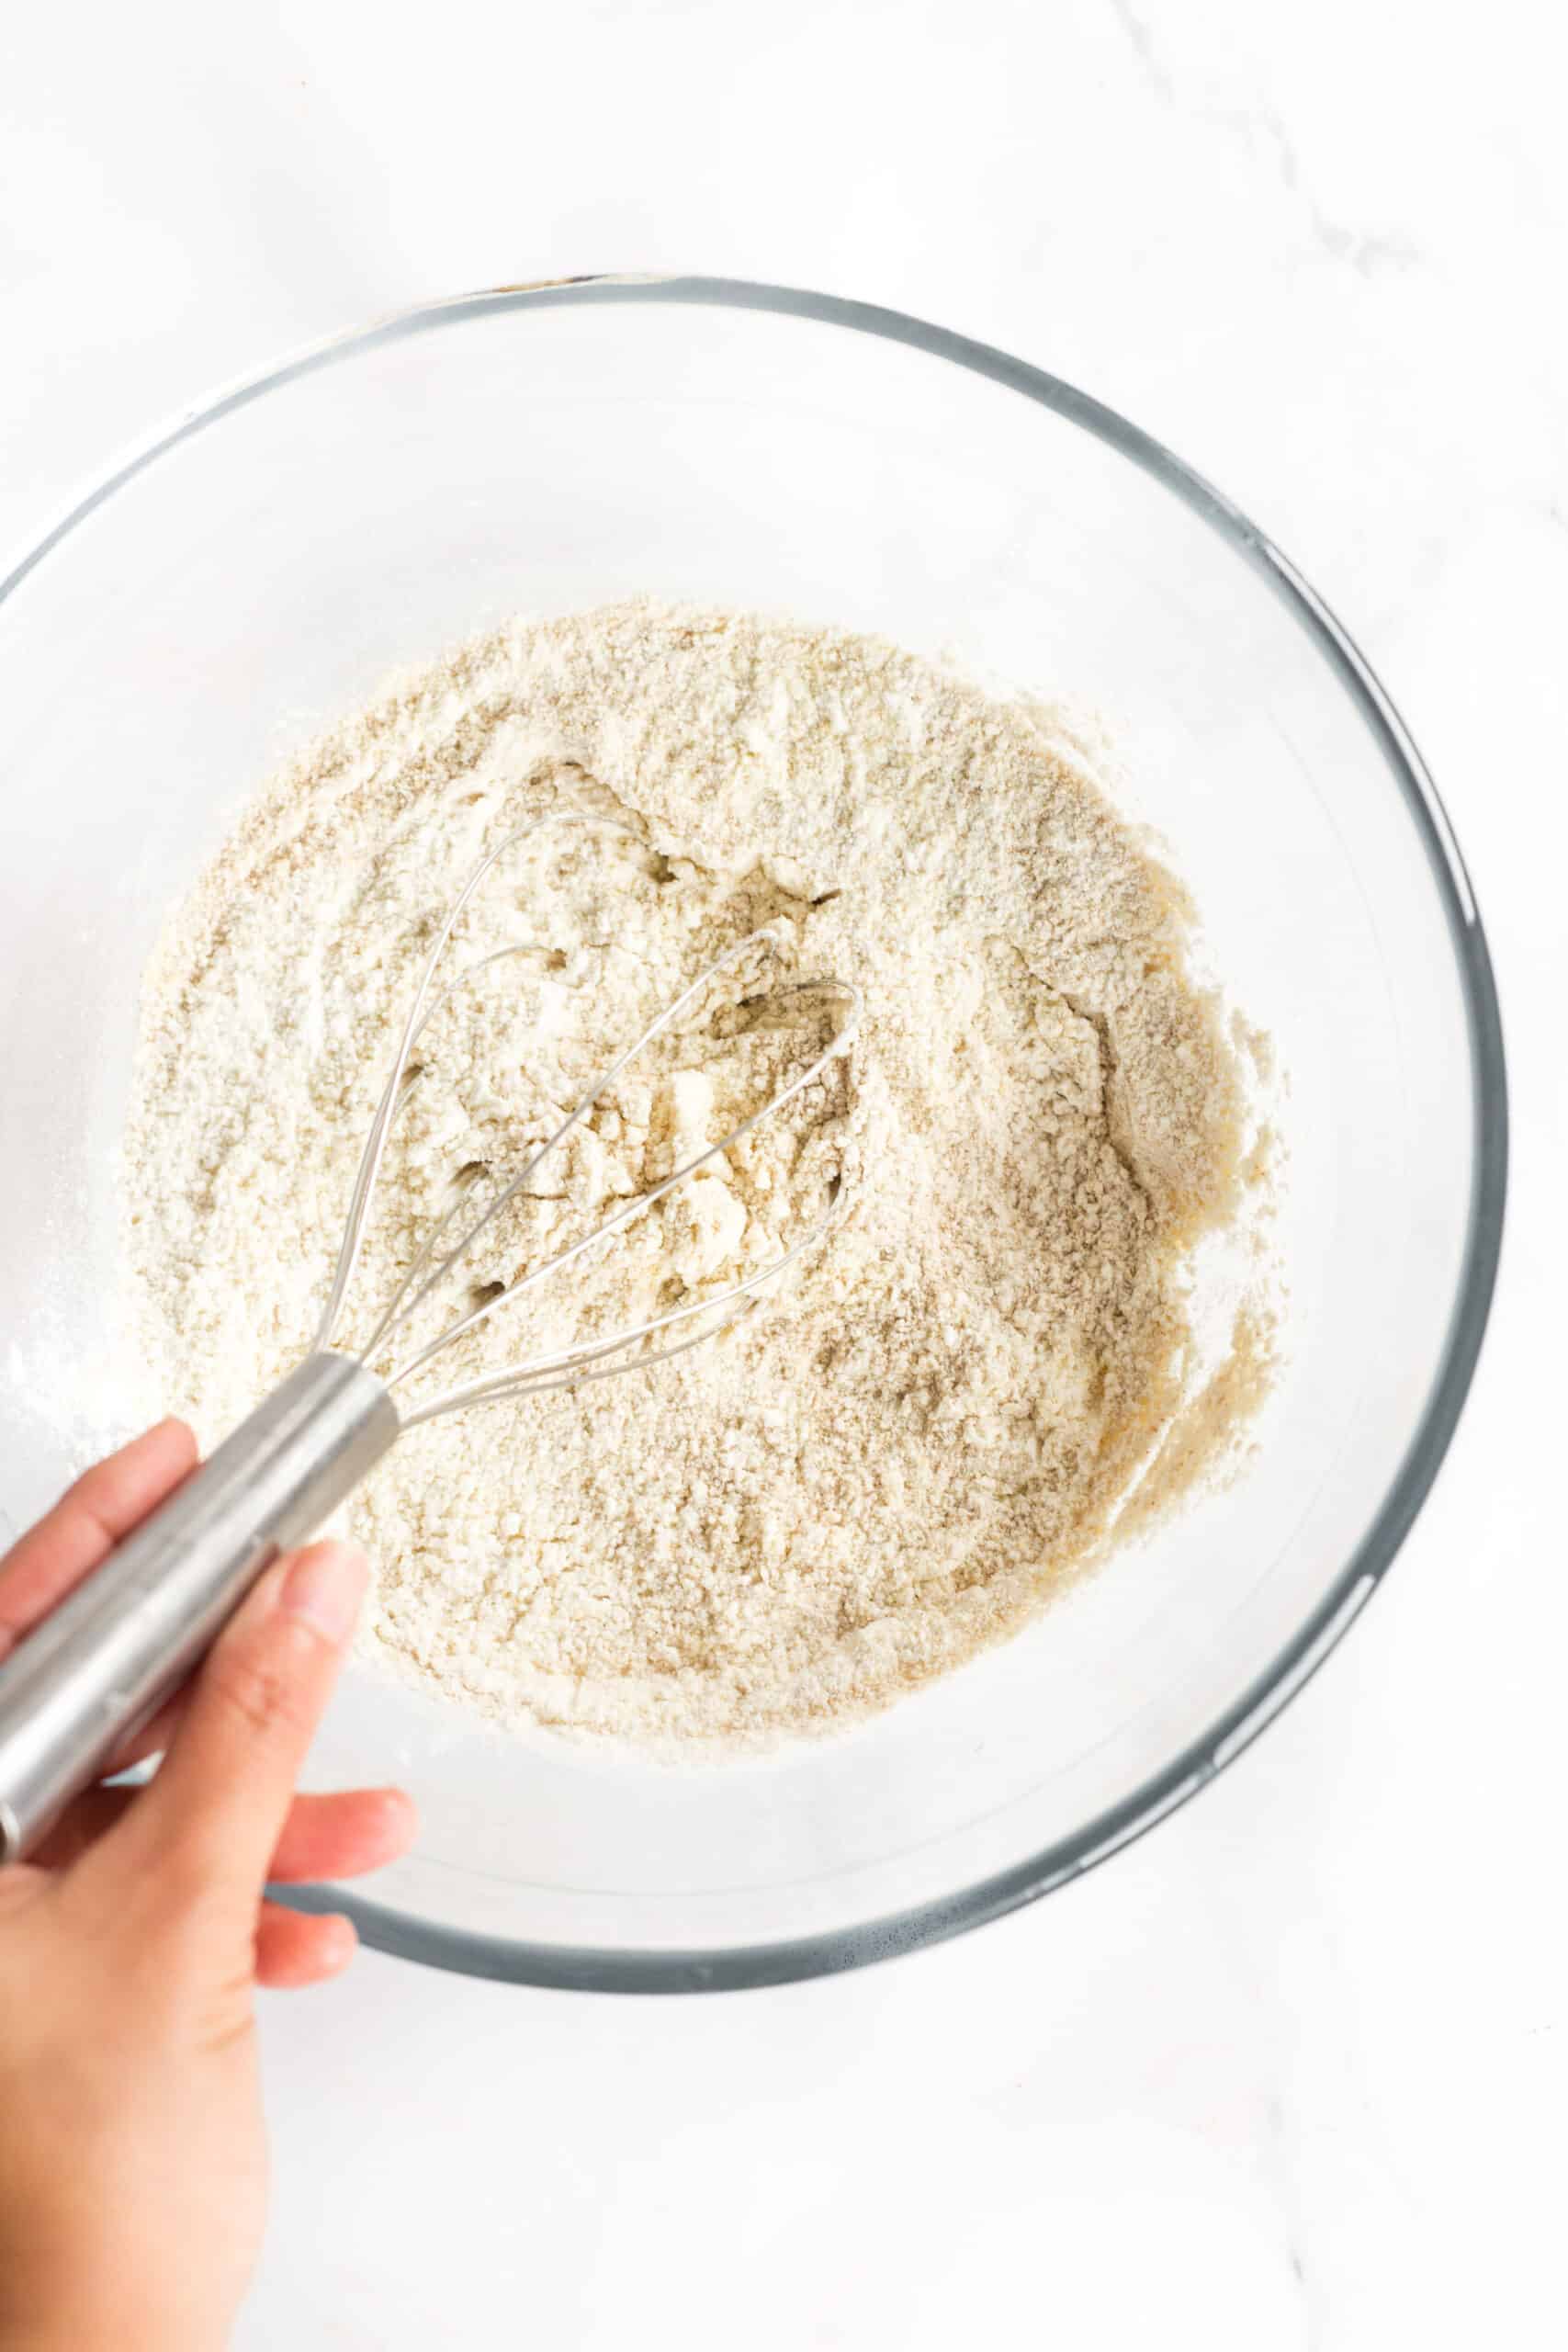 Whisking flour mixture in a glass bowl.